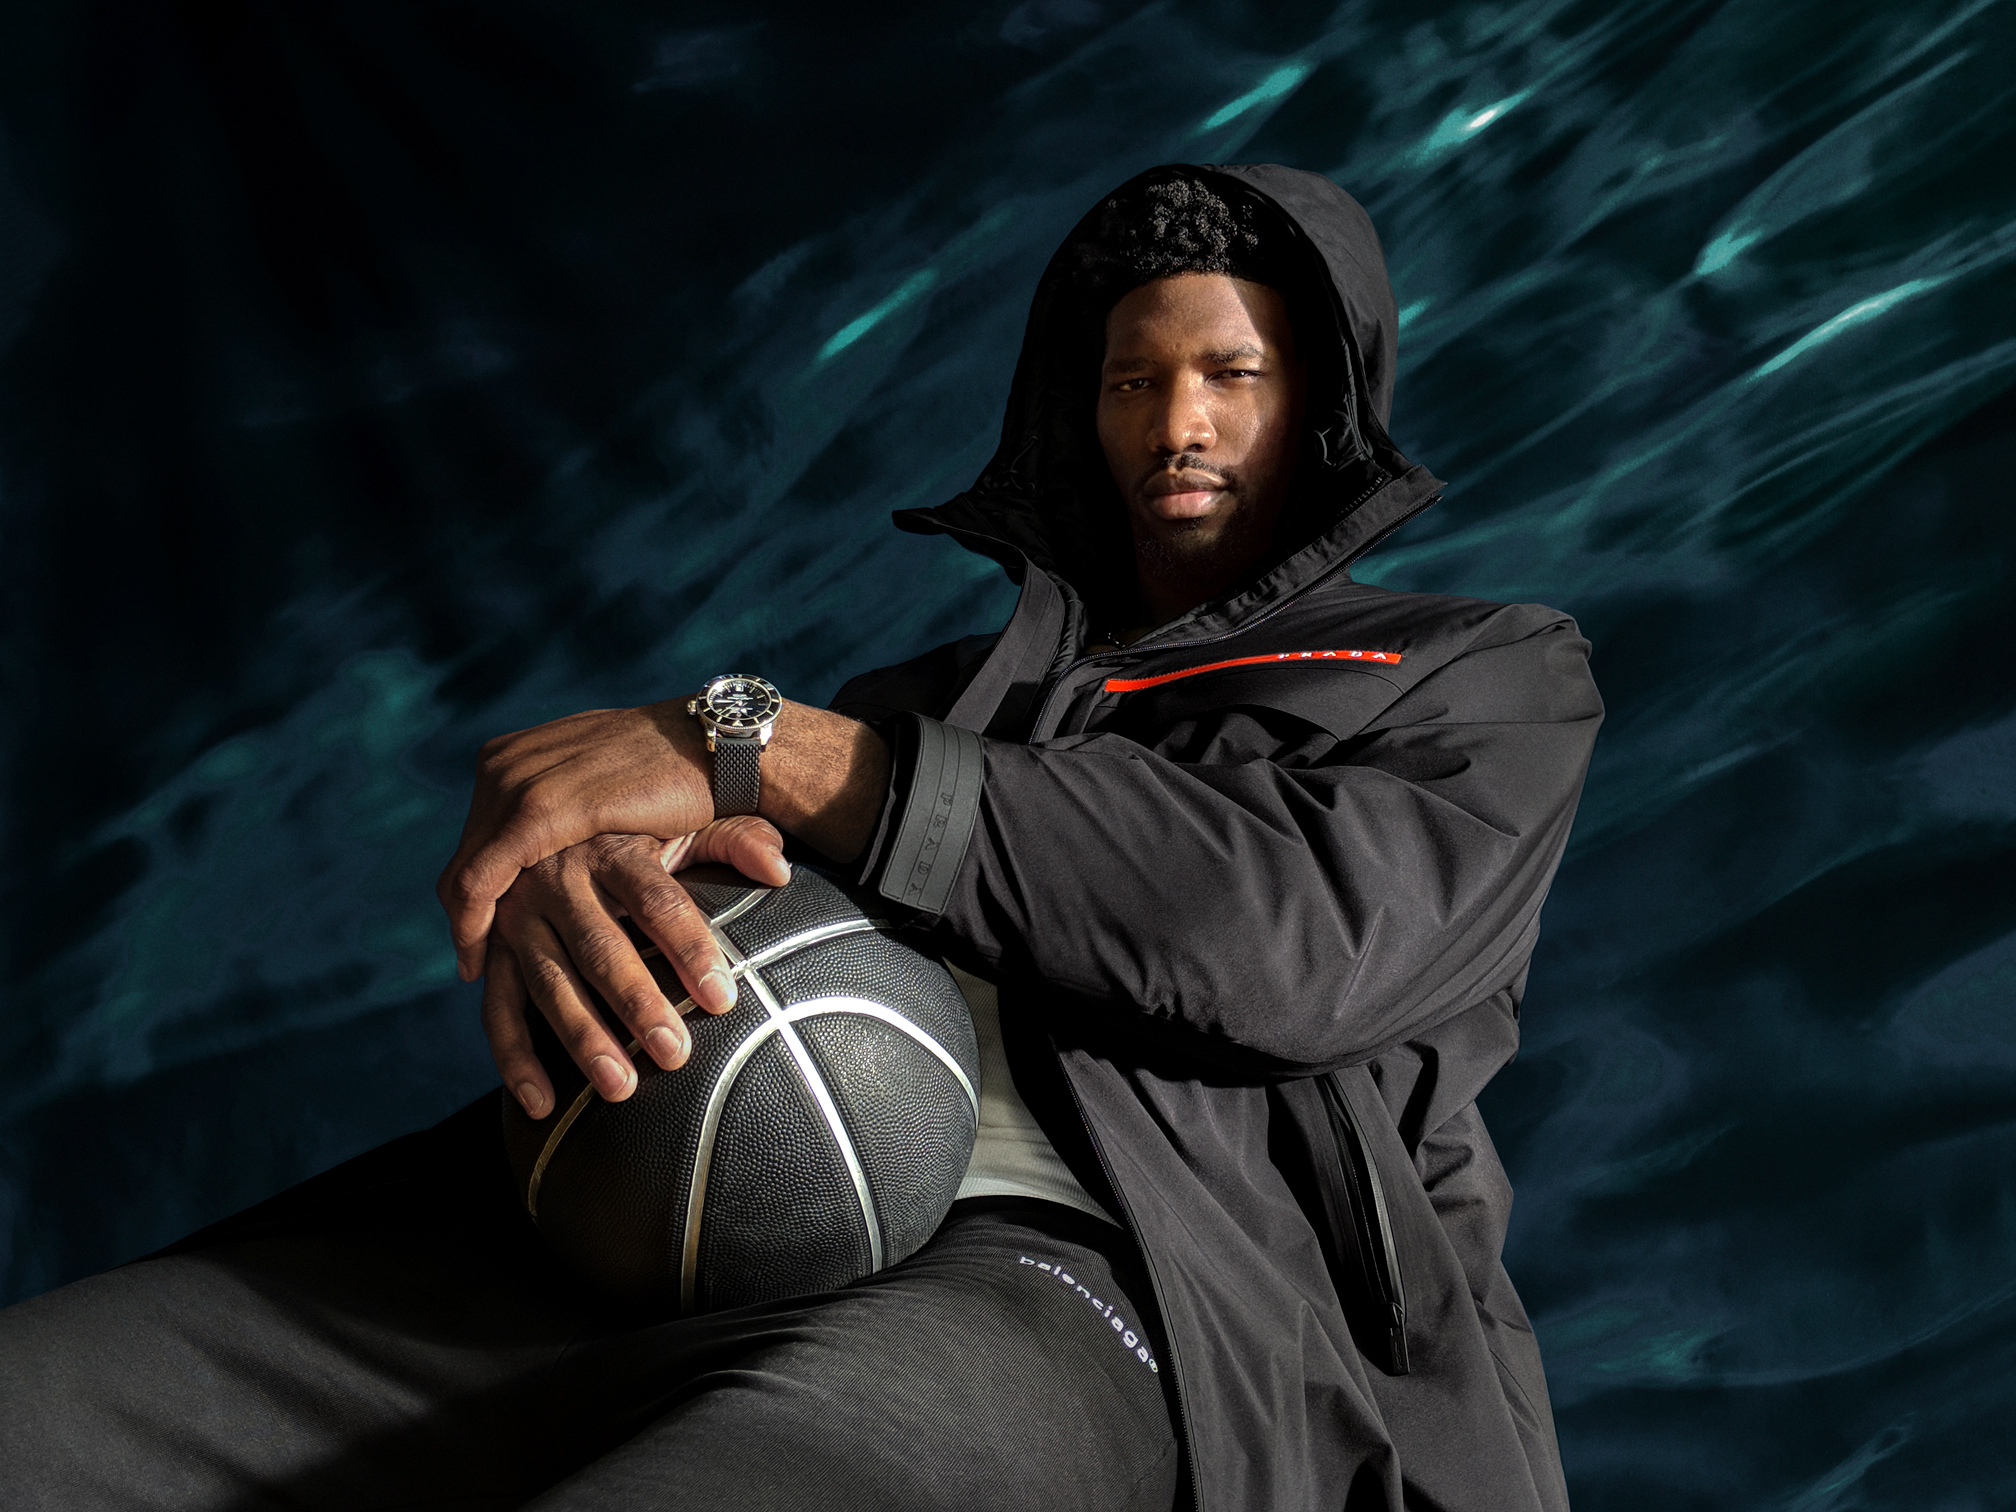 Joel Embiid on His Dark Days, Dating in the NBA, and His Astronaut Dreams